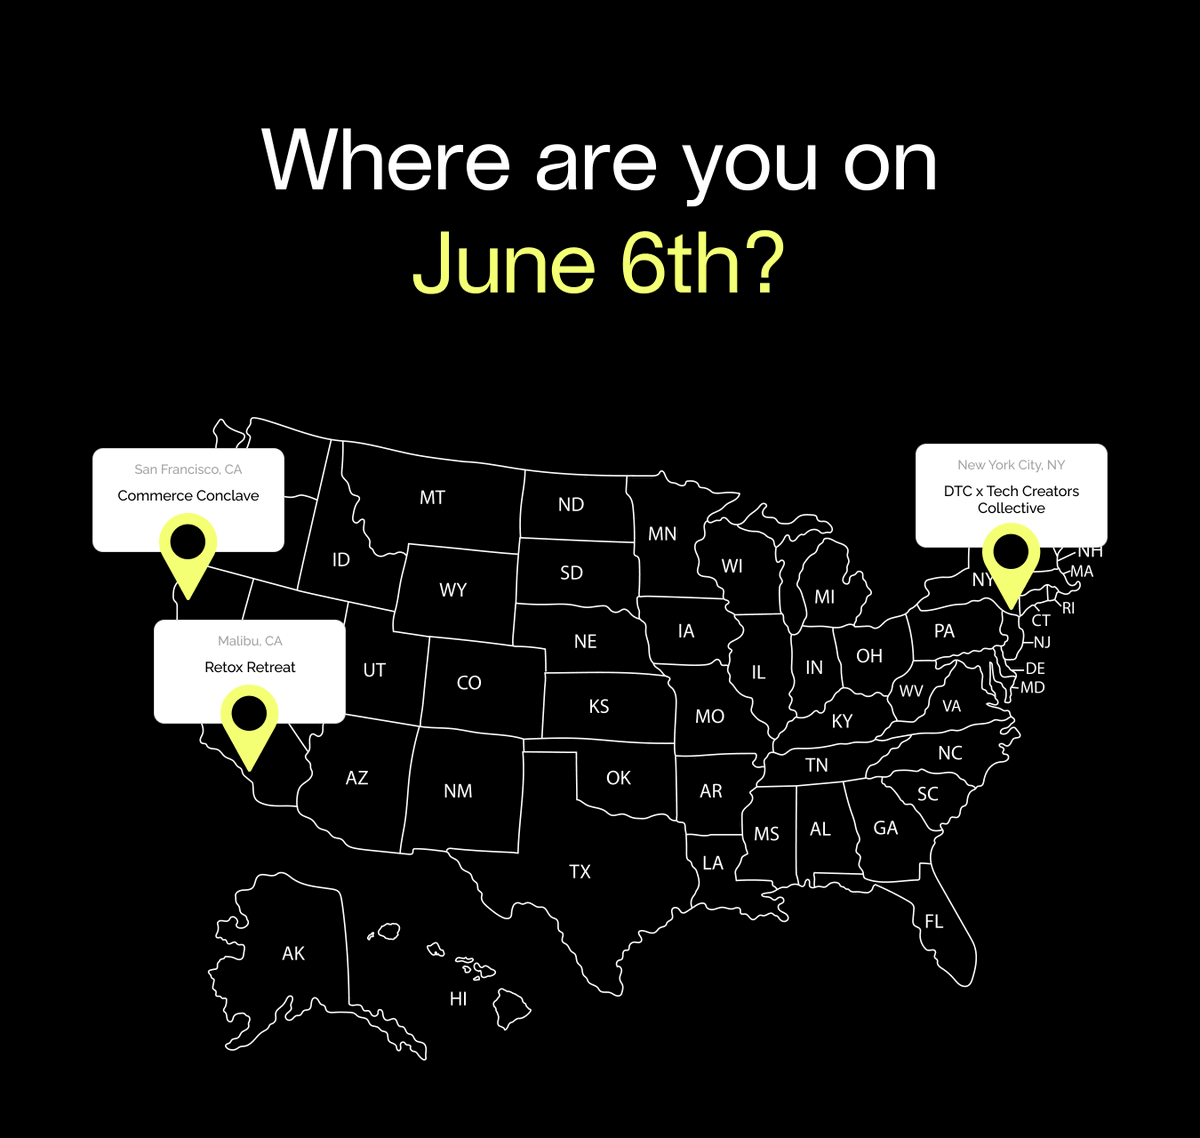 Will you be in NYC, SF, or Malibu on June 6th? I'm calling this @fermatcommerce takeover day, because we'll be at events in each of these cities, simultaneously: If you're in Malibu, come meet our team at @Retentiondotcom's Retox Retreat. In San Fran, we'll be co-hosting a